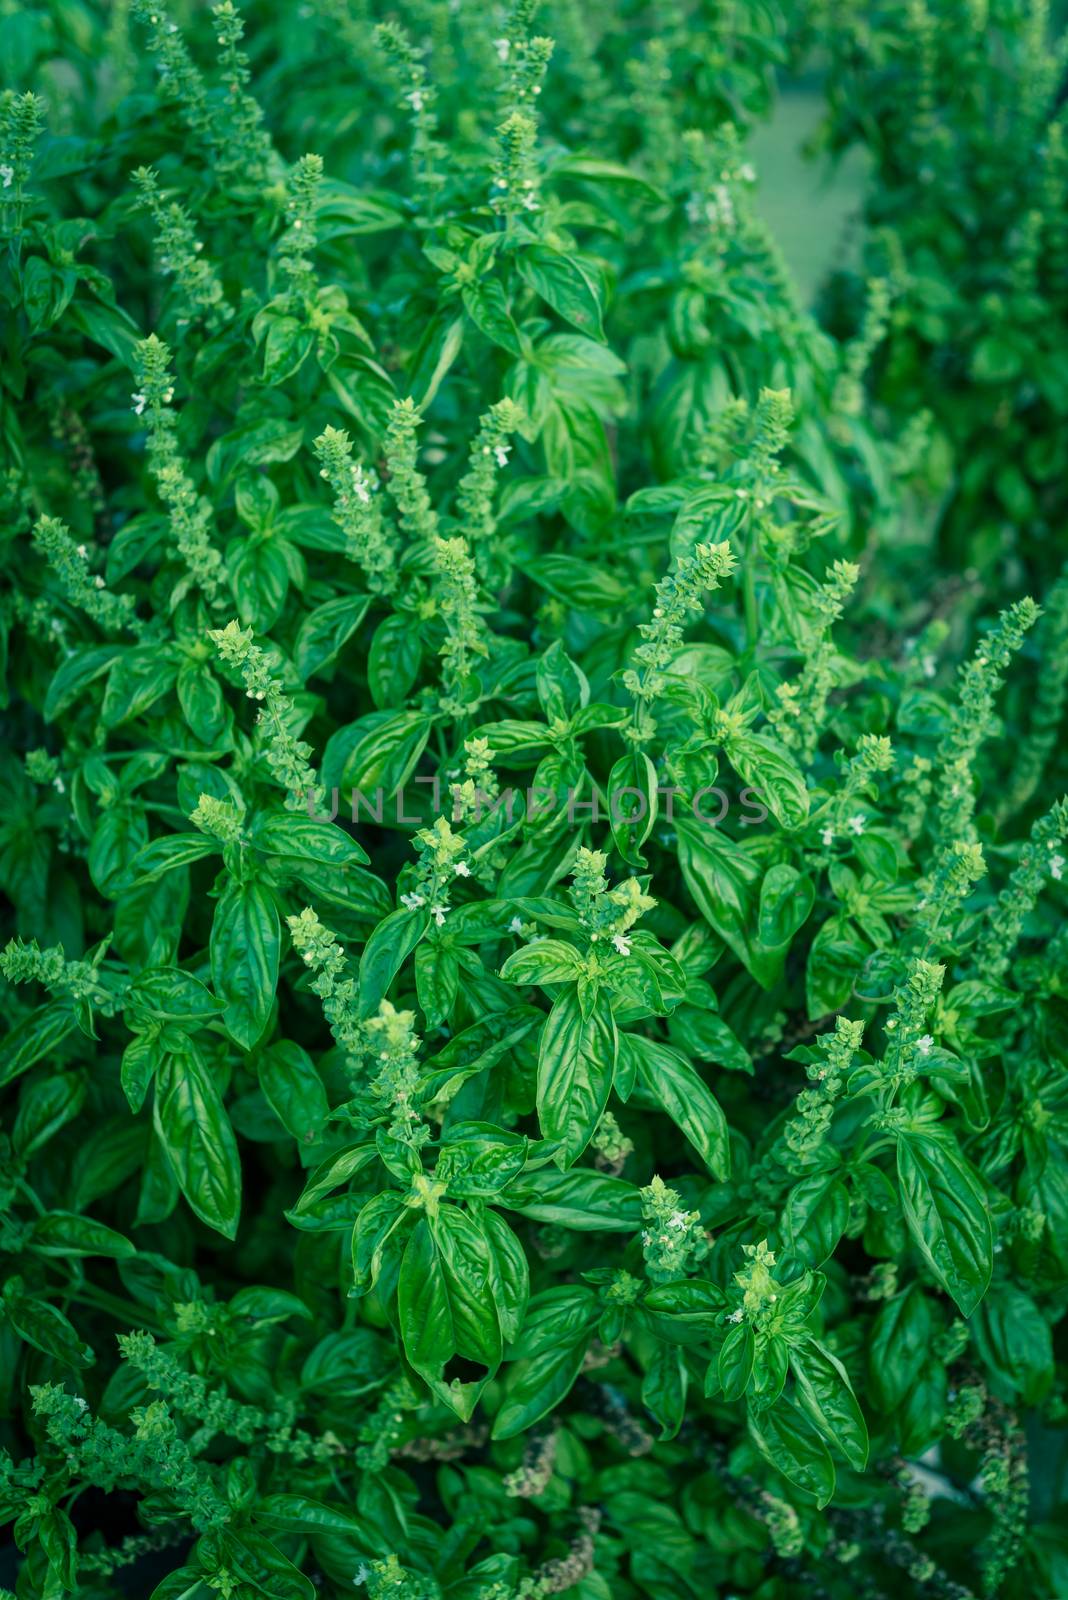 Top view a large bush of sweet basil with blooming flower and white petals. Blossom homegrown Lamiaceae culinary herb at organic backyard garden in Texas, America